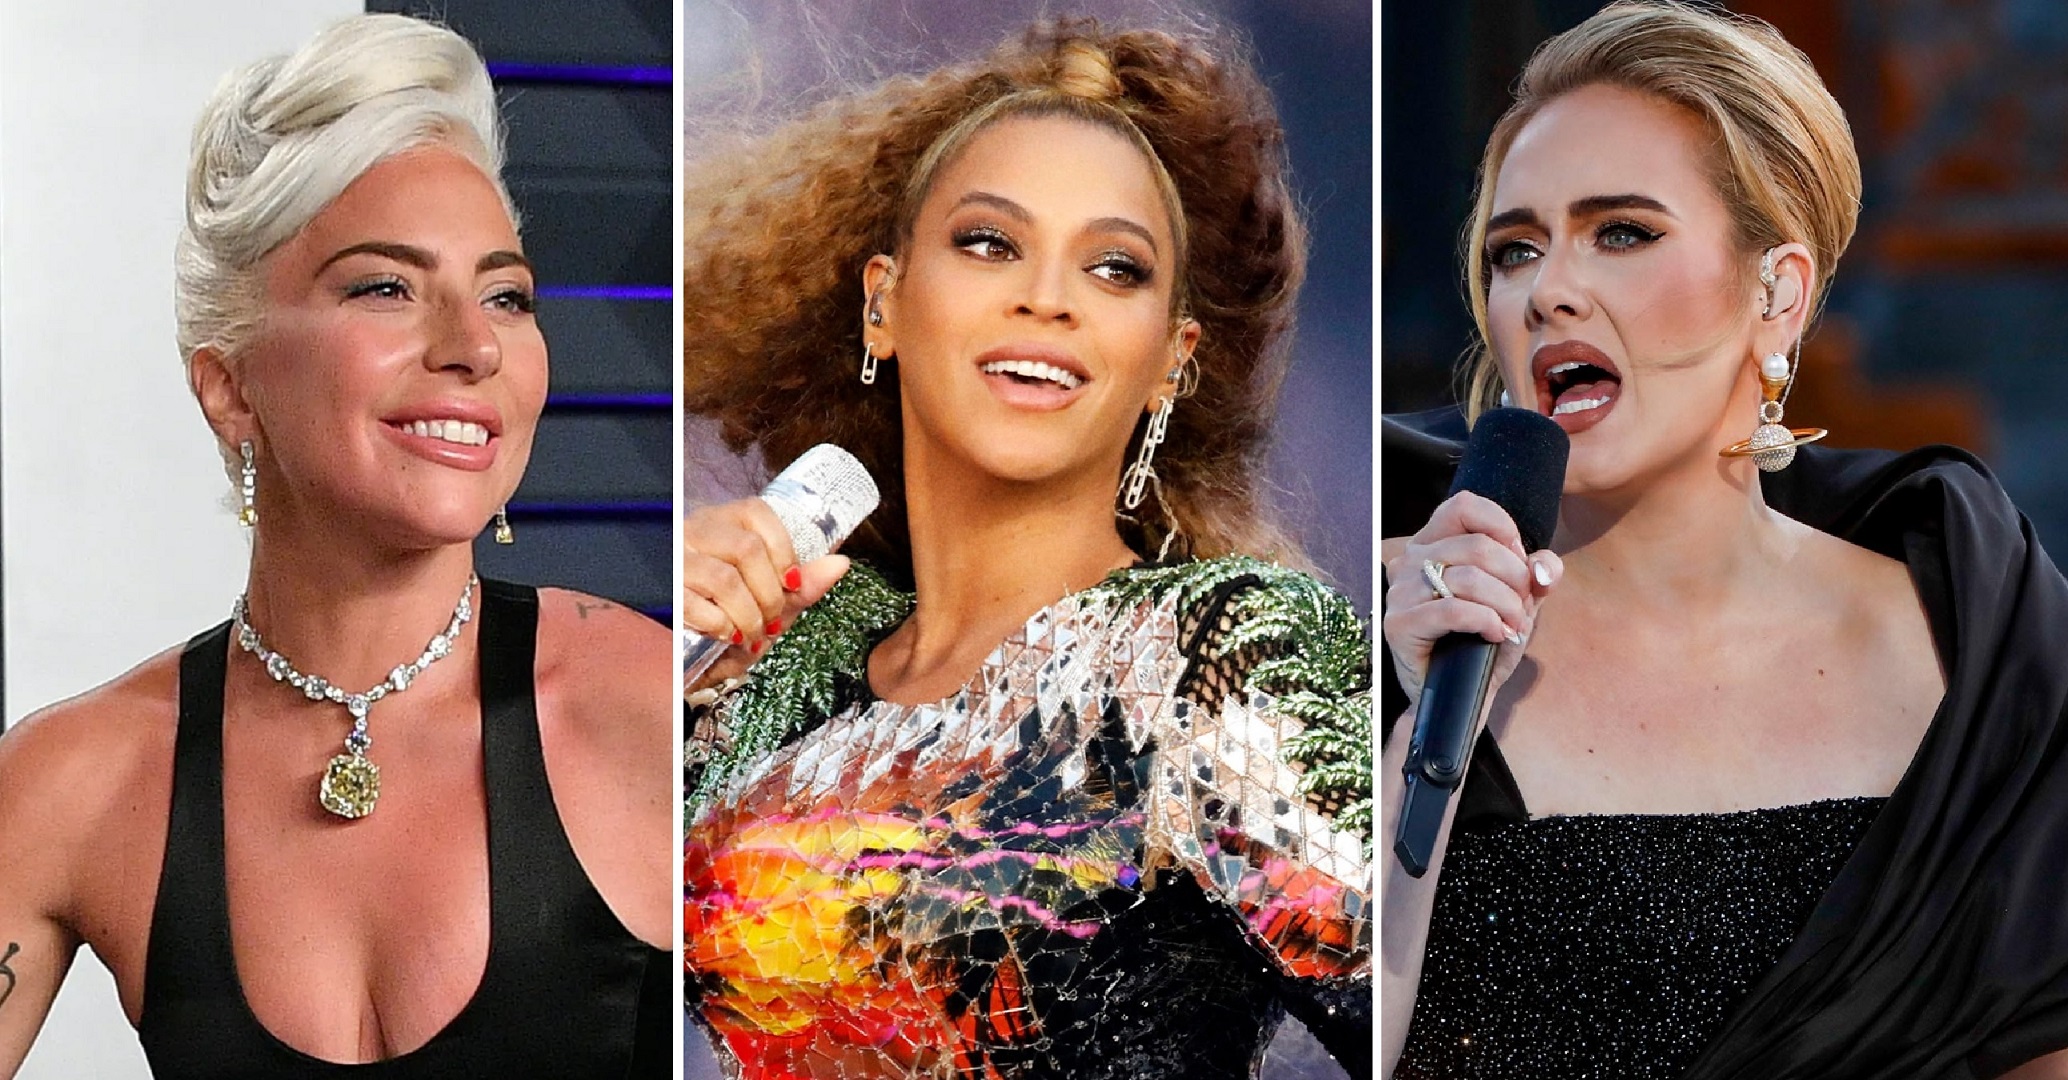 The Top 10 Best Female Singers Of The Last 20 Years – The Best Voices Between 2001 – 2021